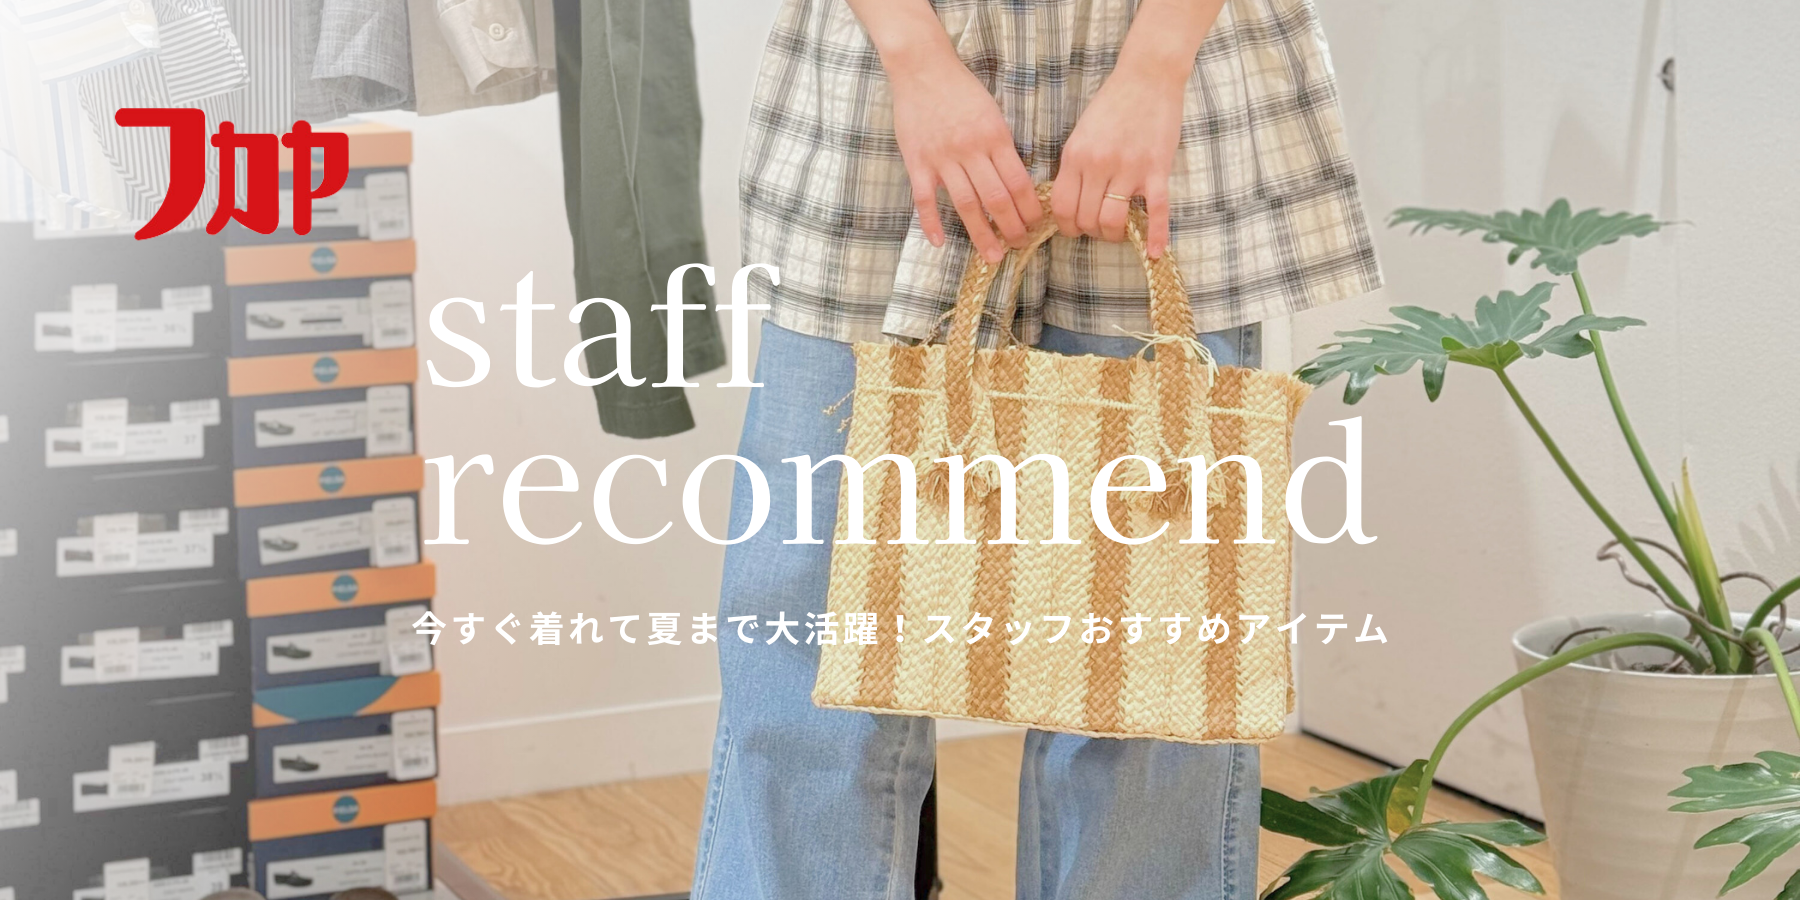 35_staff_recommend_banner.png